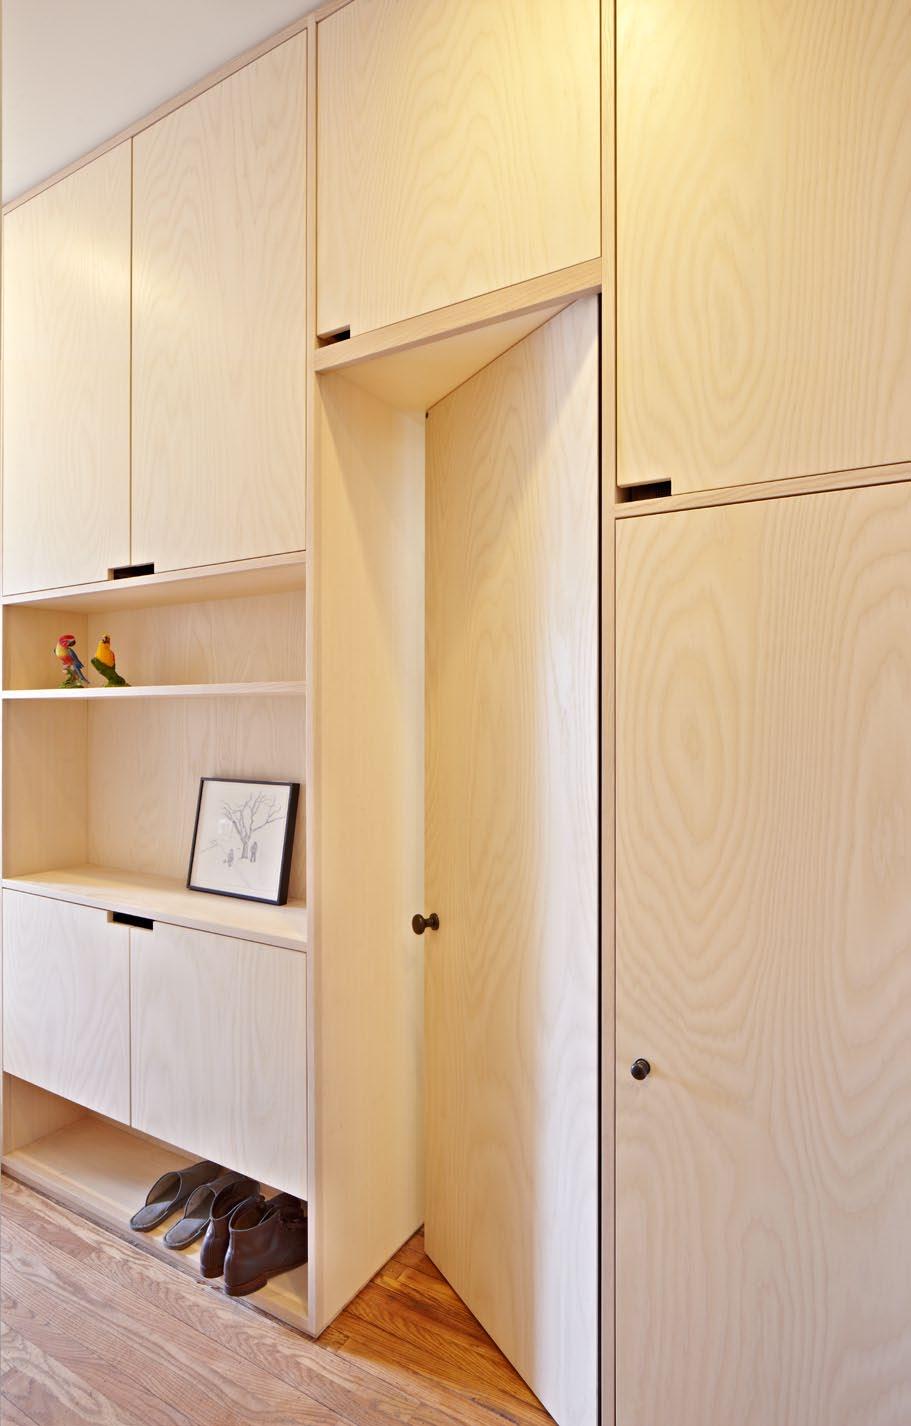 A discreet cabinet door opens to provide access to a full